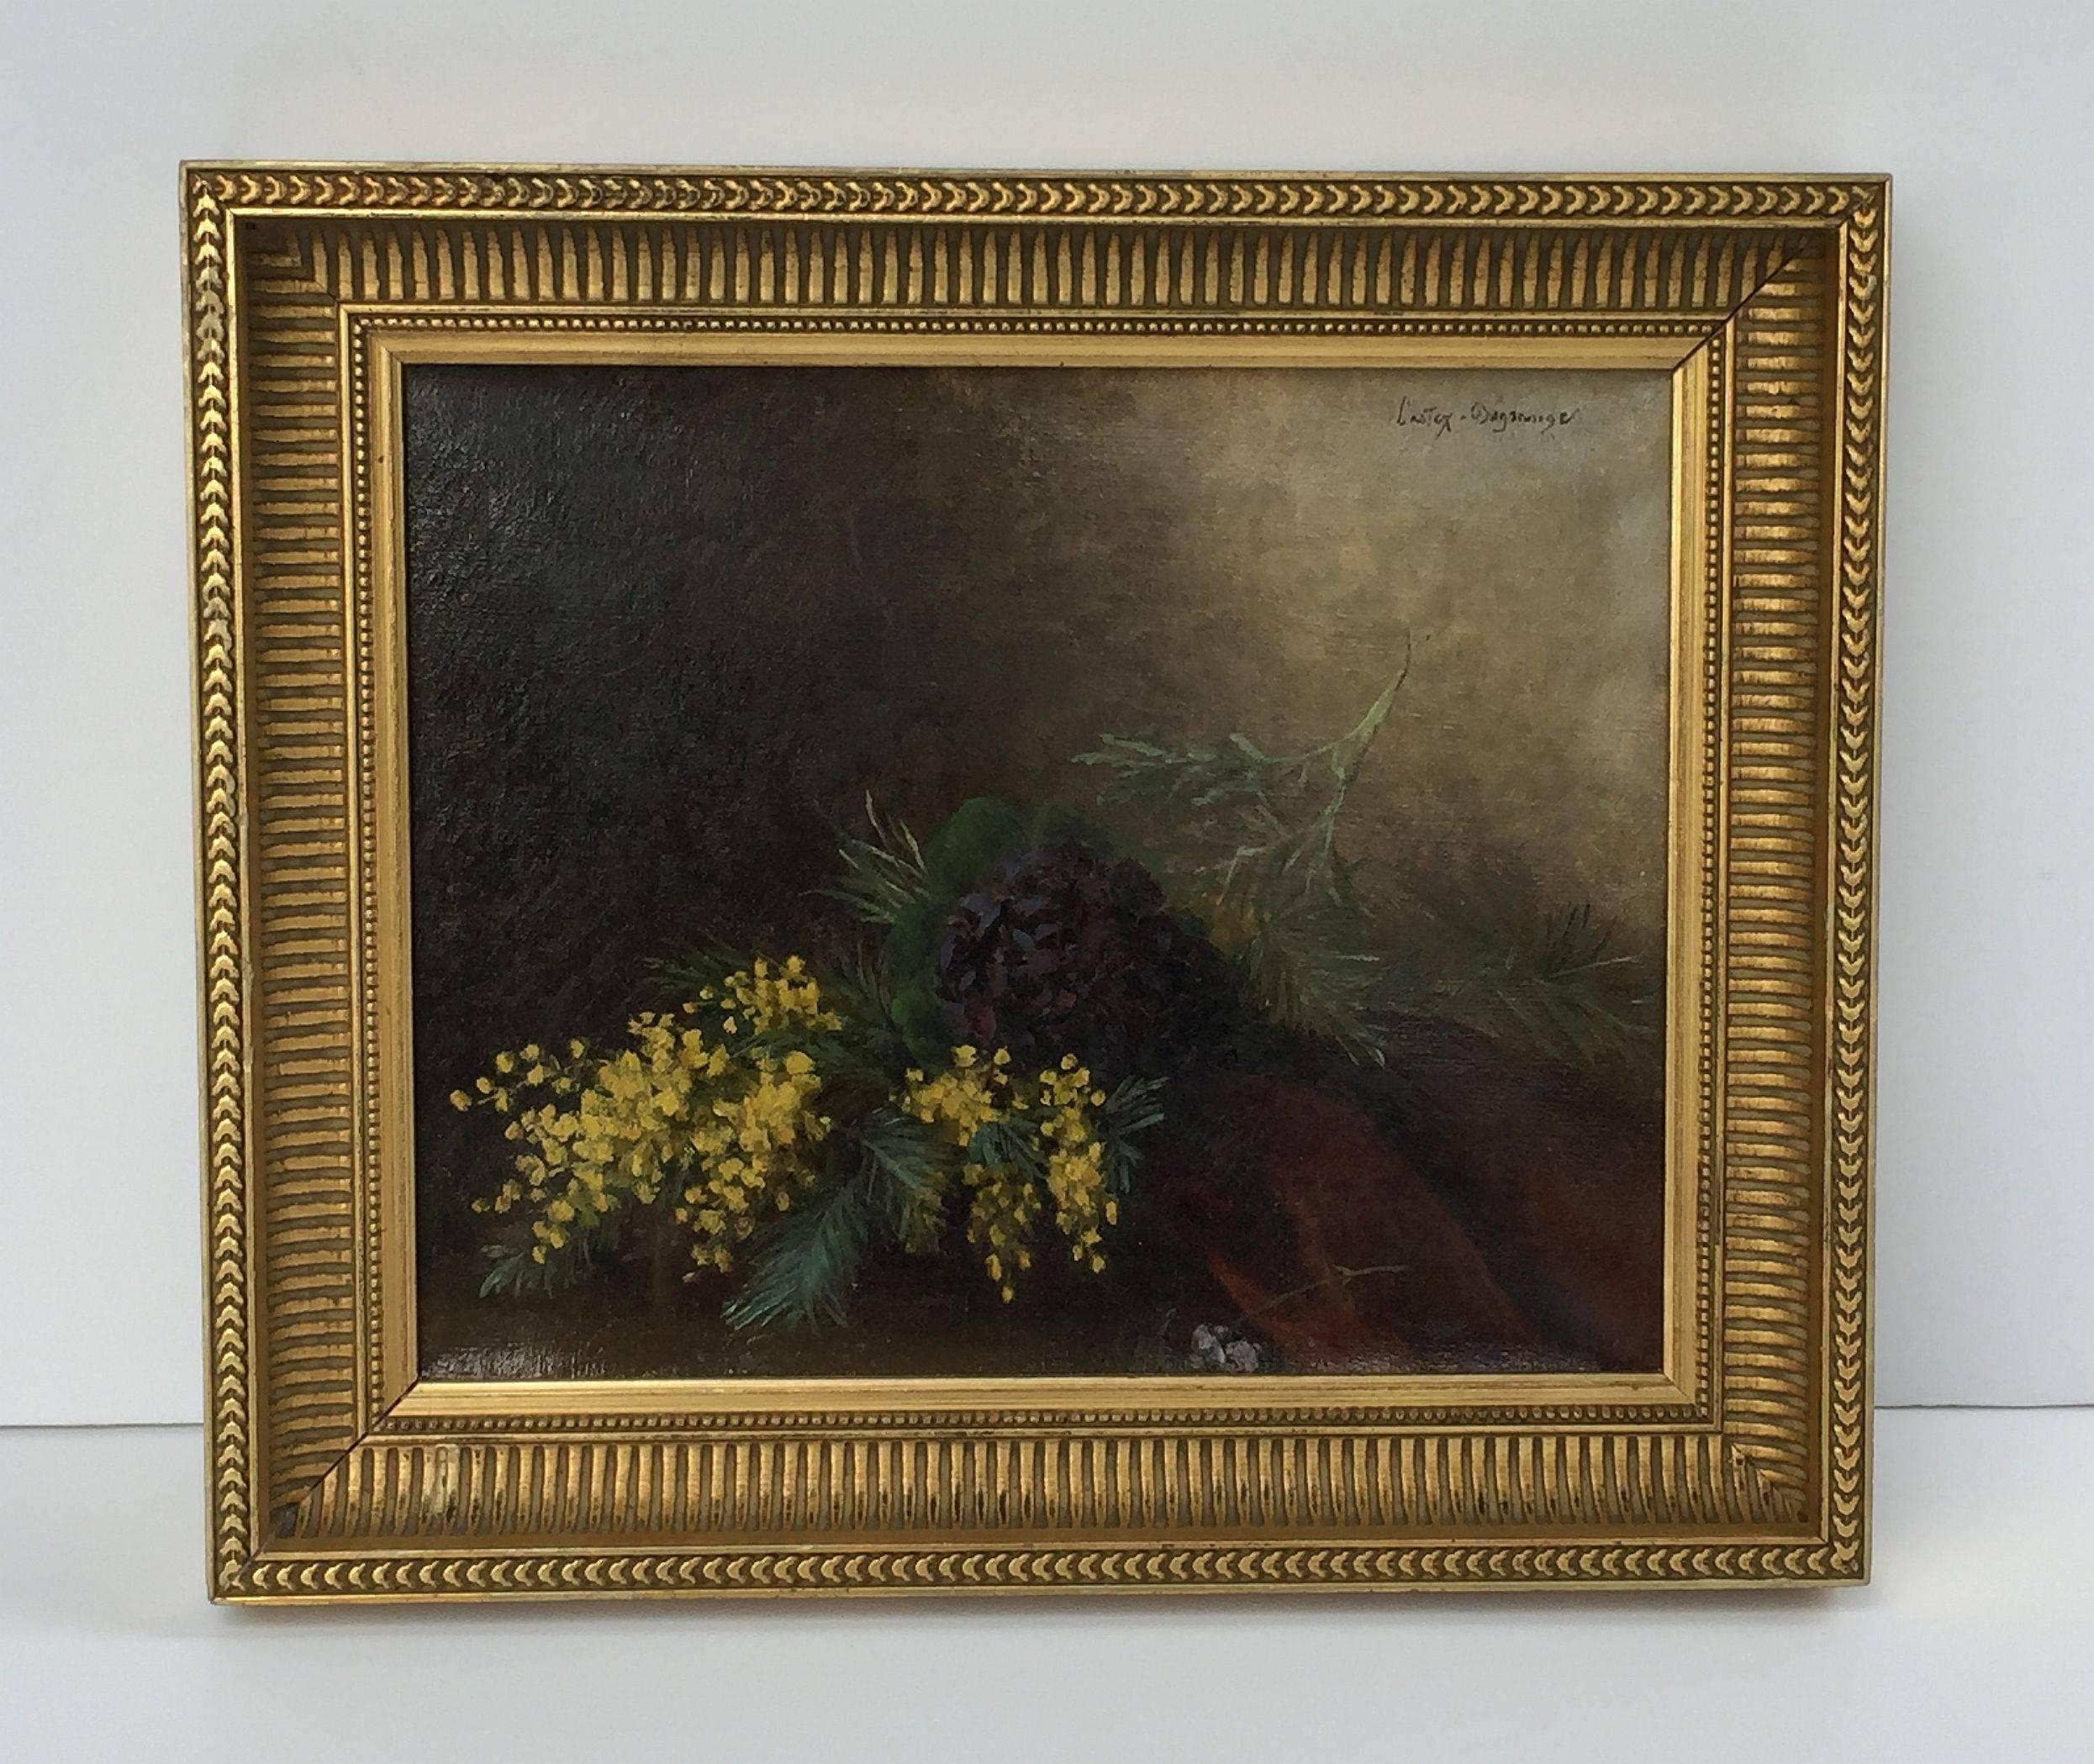 A fine French oil painting on canvas in a giltwood frame, featuring a still life of flowers.

Signed: Castex-Degrange.

